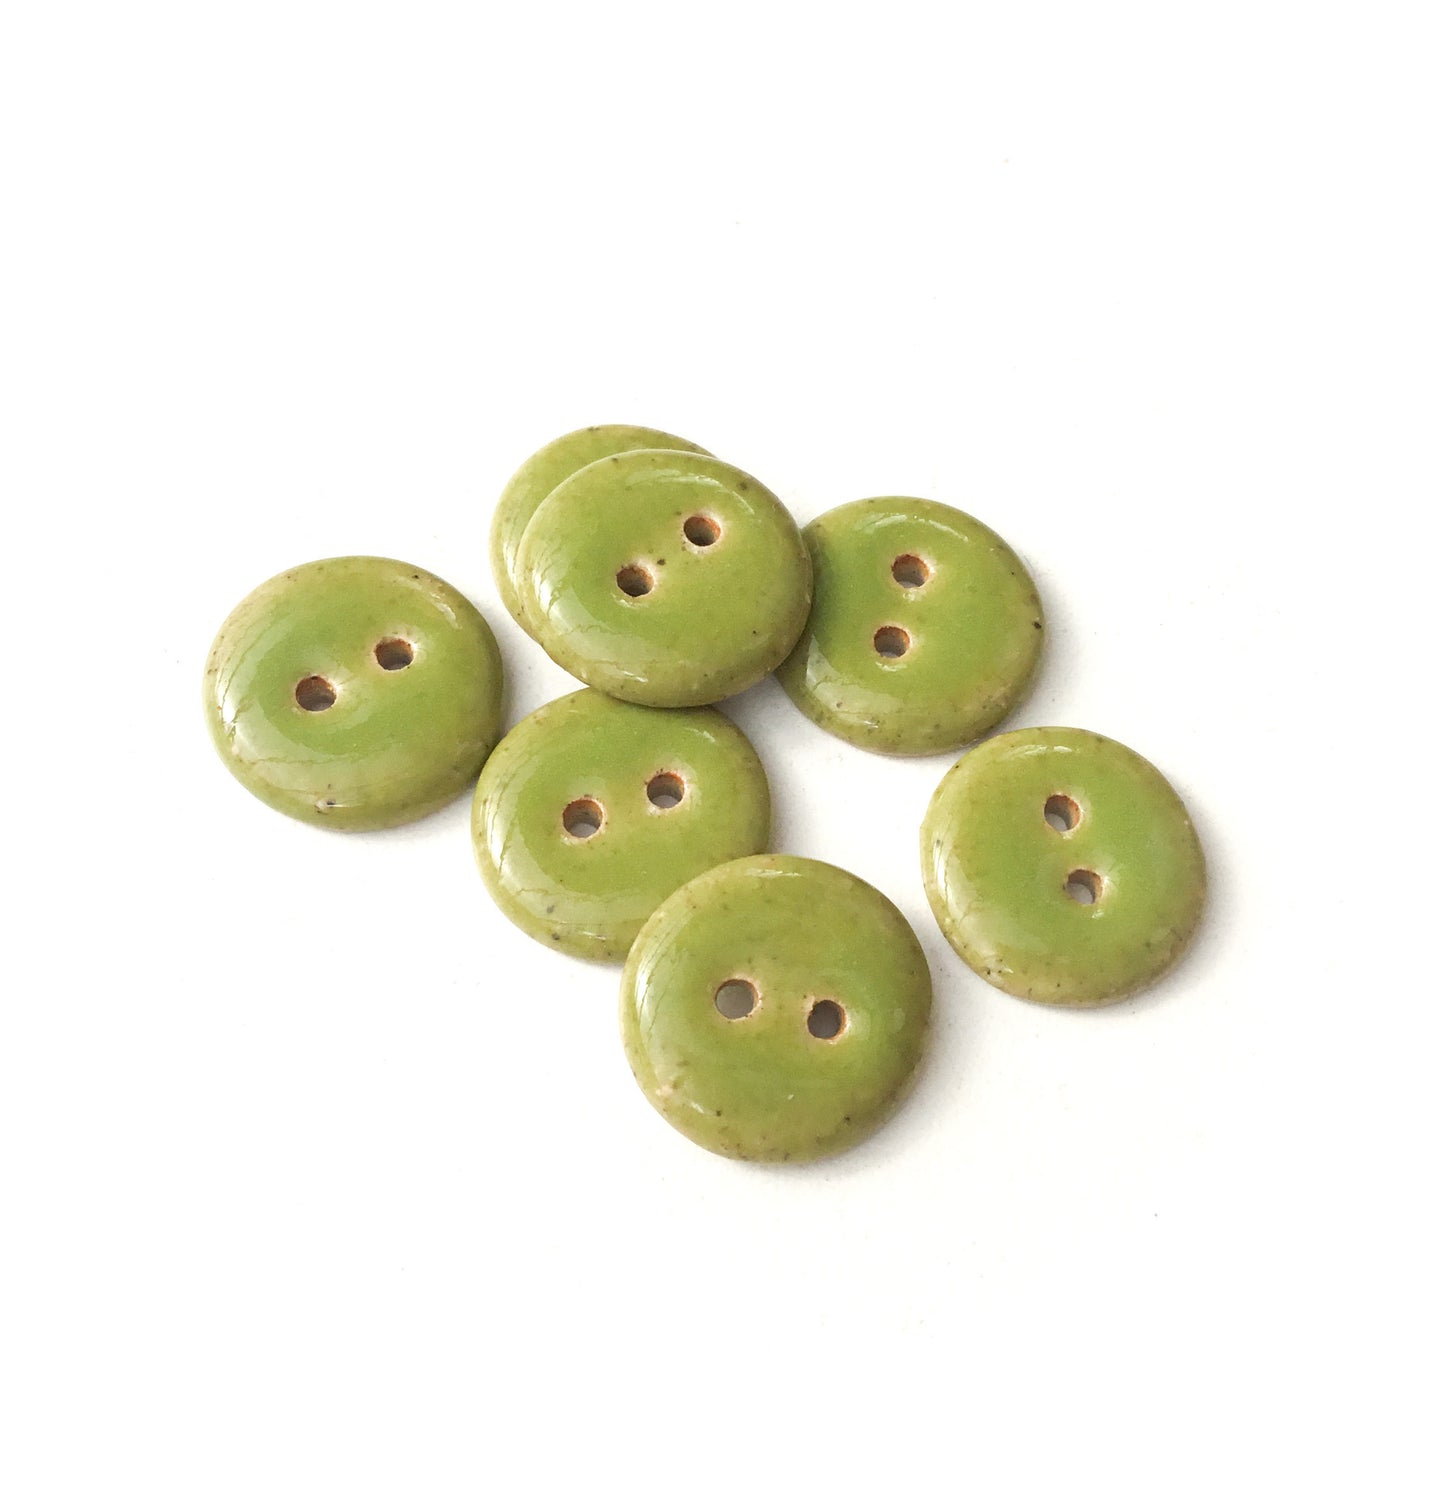 Olive Green Ceramic Stoneware Buttons  5/8" - 7 Pack